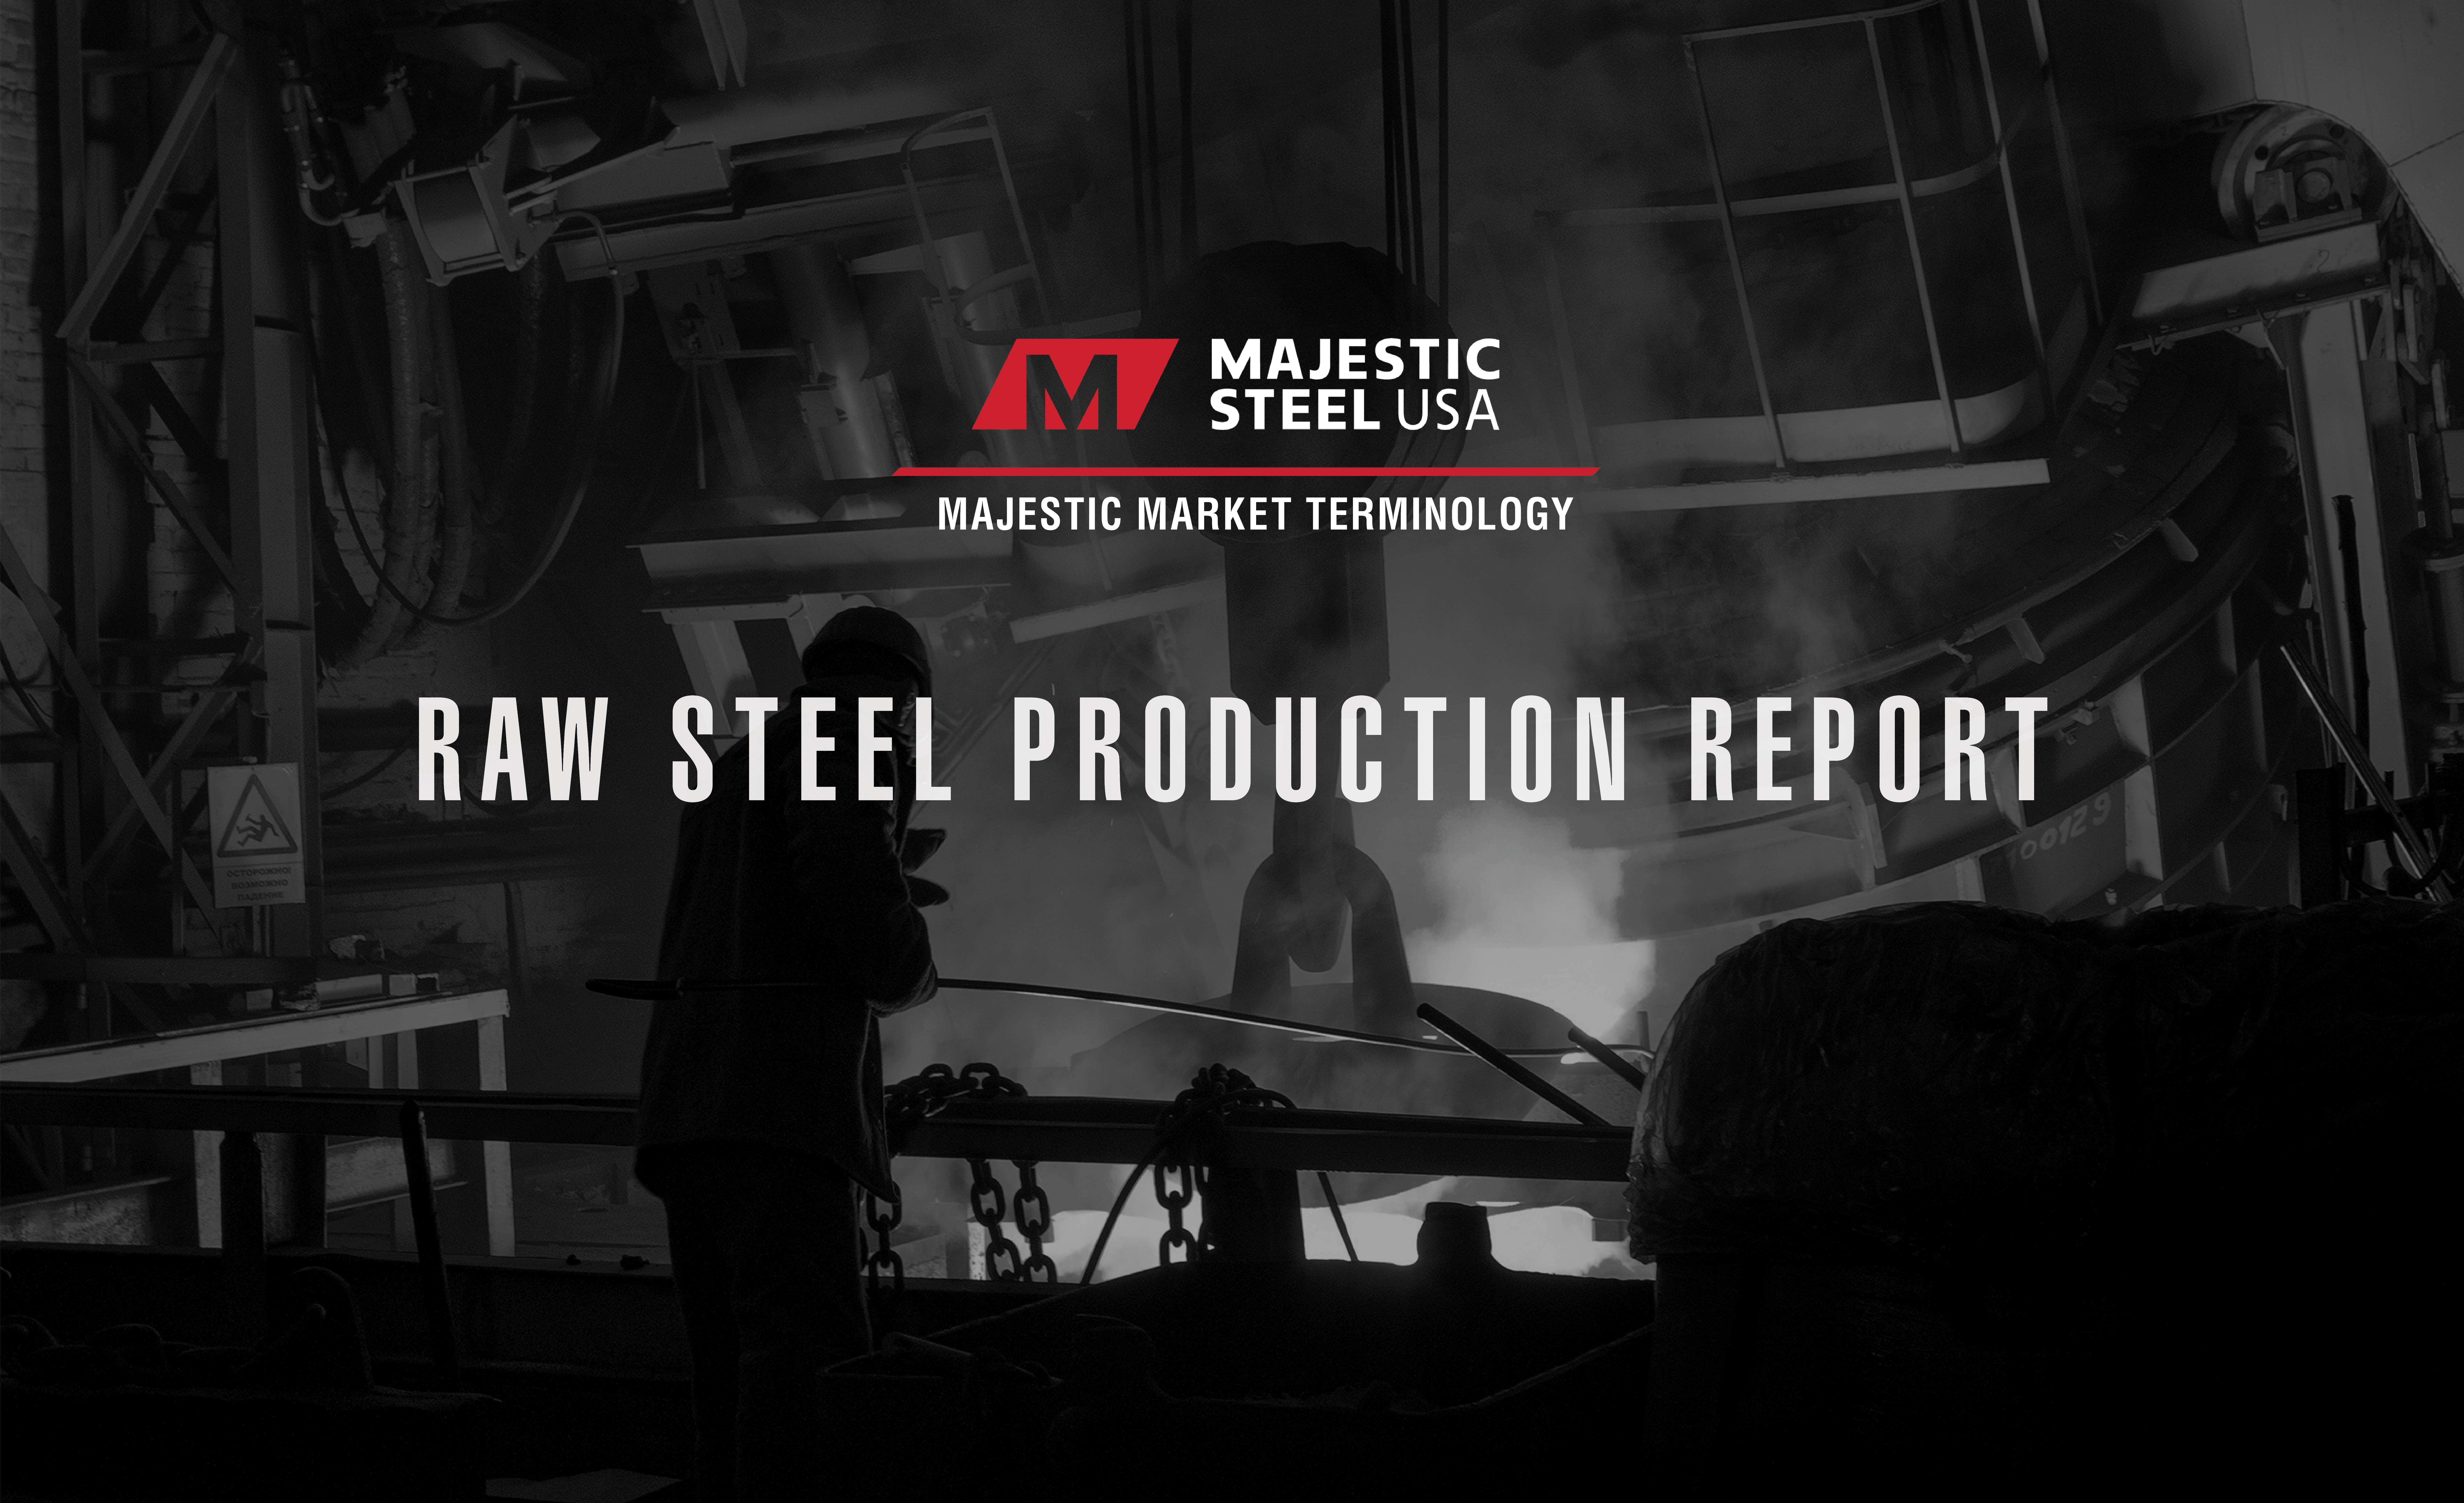 black and white image of raw steel production that represents that raw steel production report